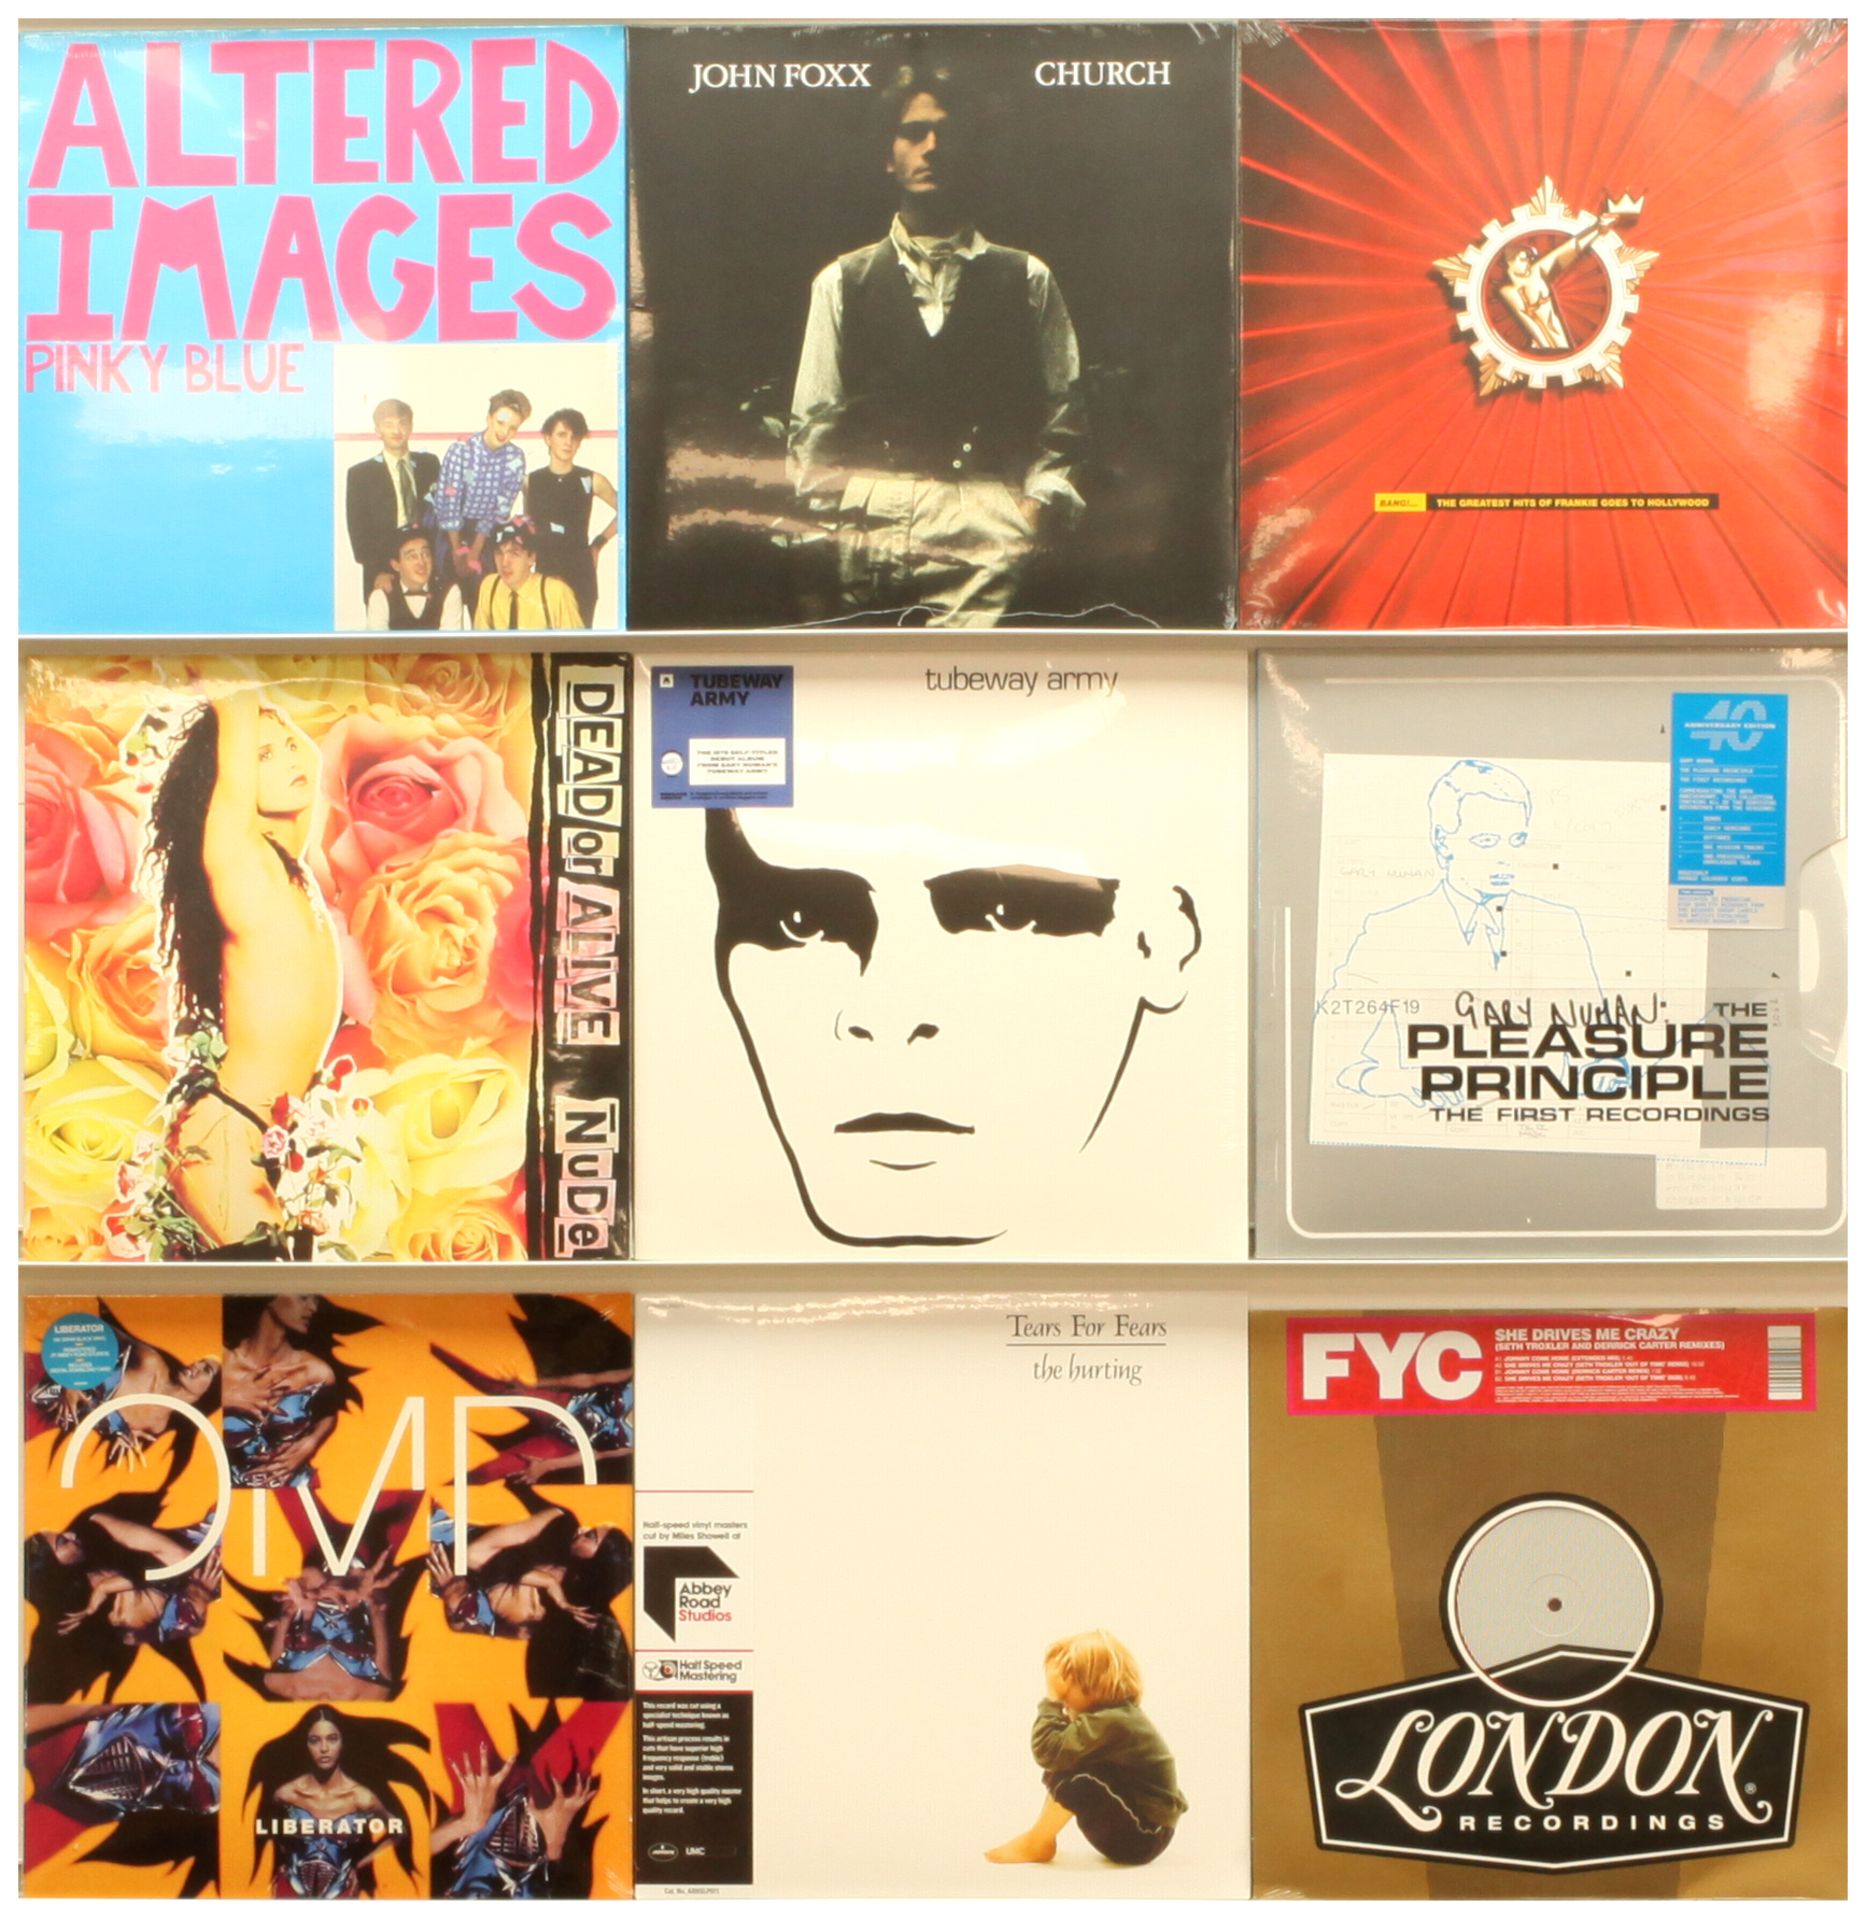 Classic Synth Pop/Electronic/Pop Reissue LPs